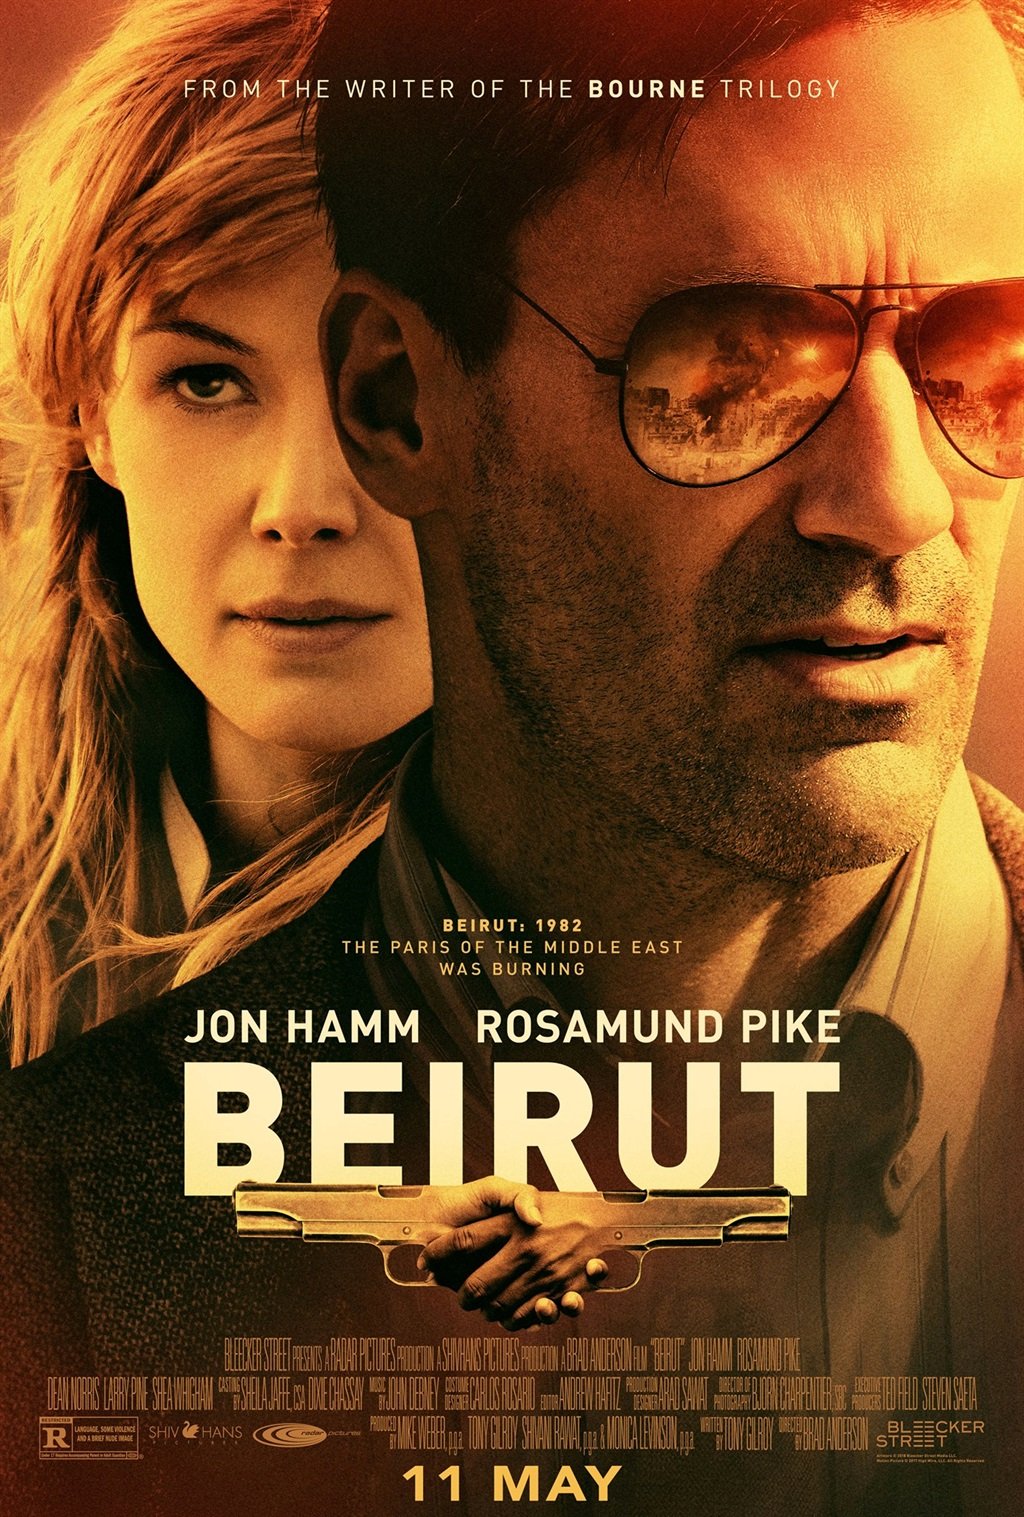 The movie poster for the movie Beirut.